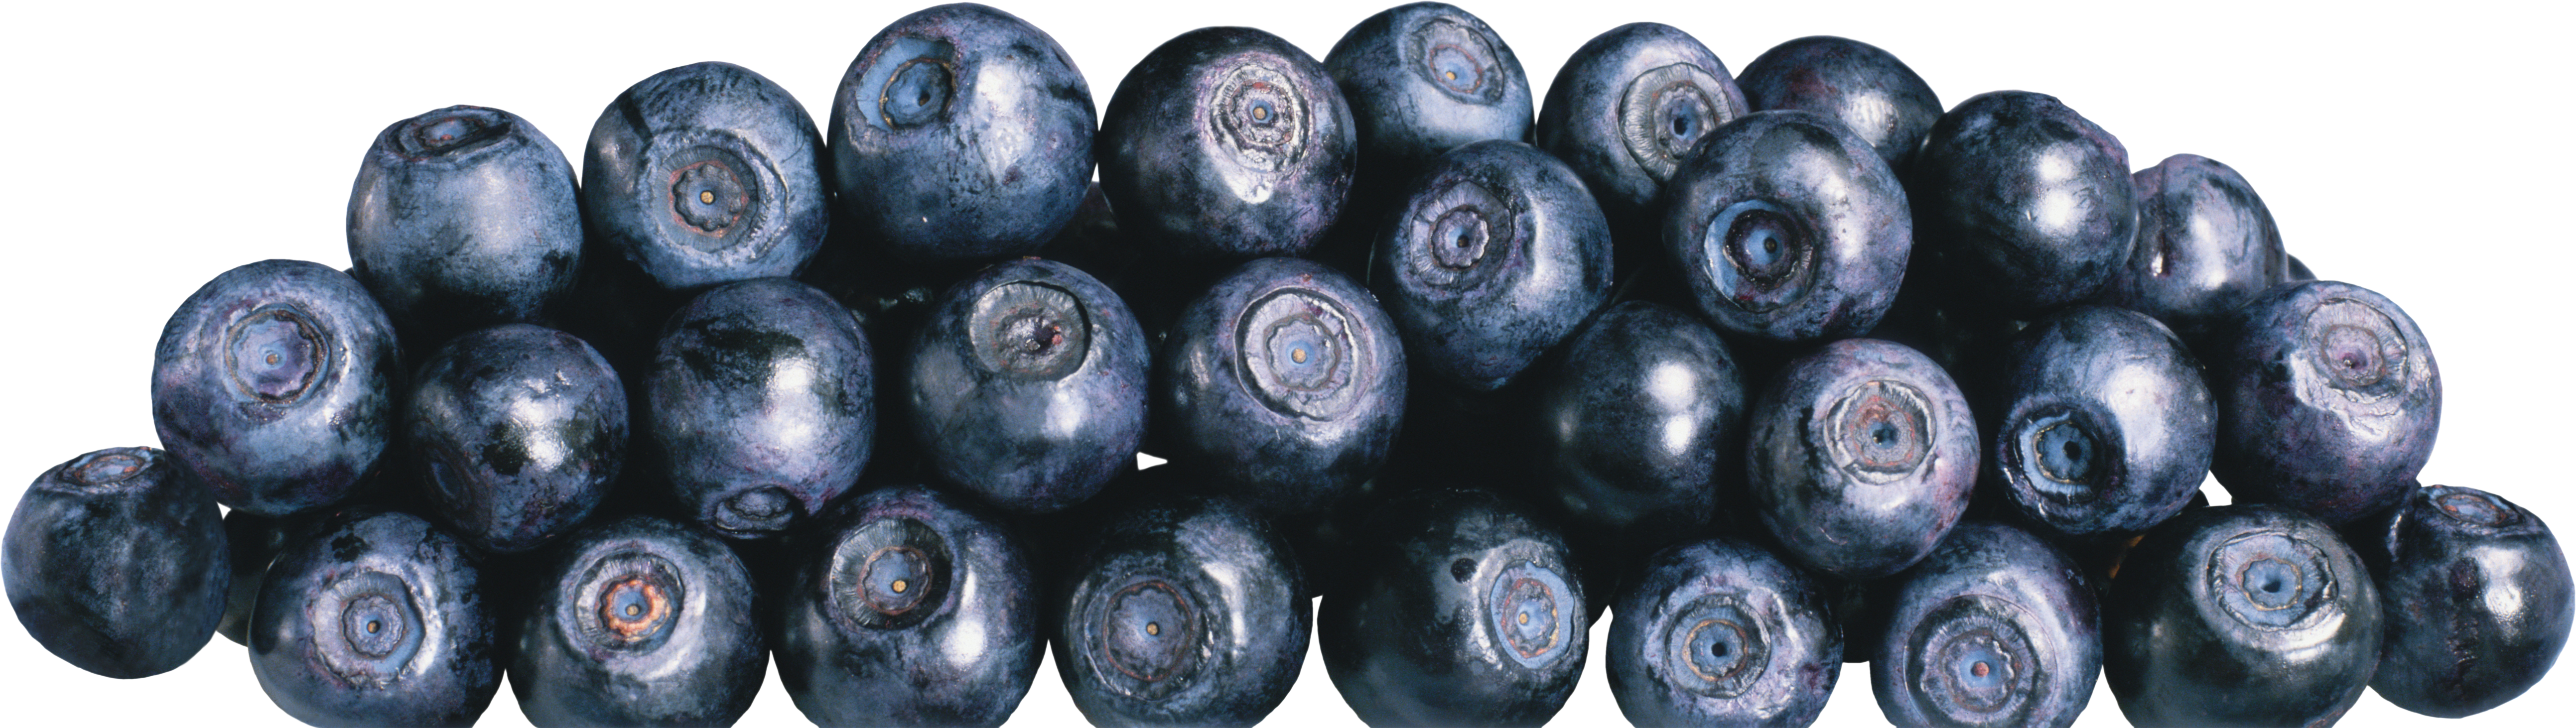 Blueberries Png Image - Blueberry (5171x1462), Png Download